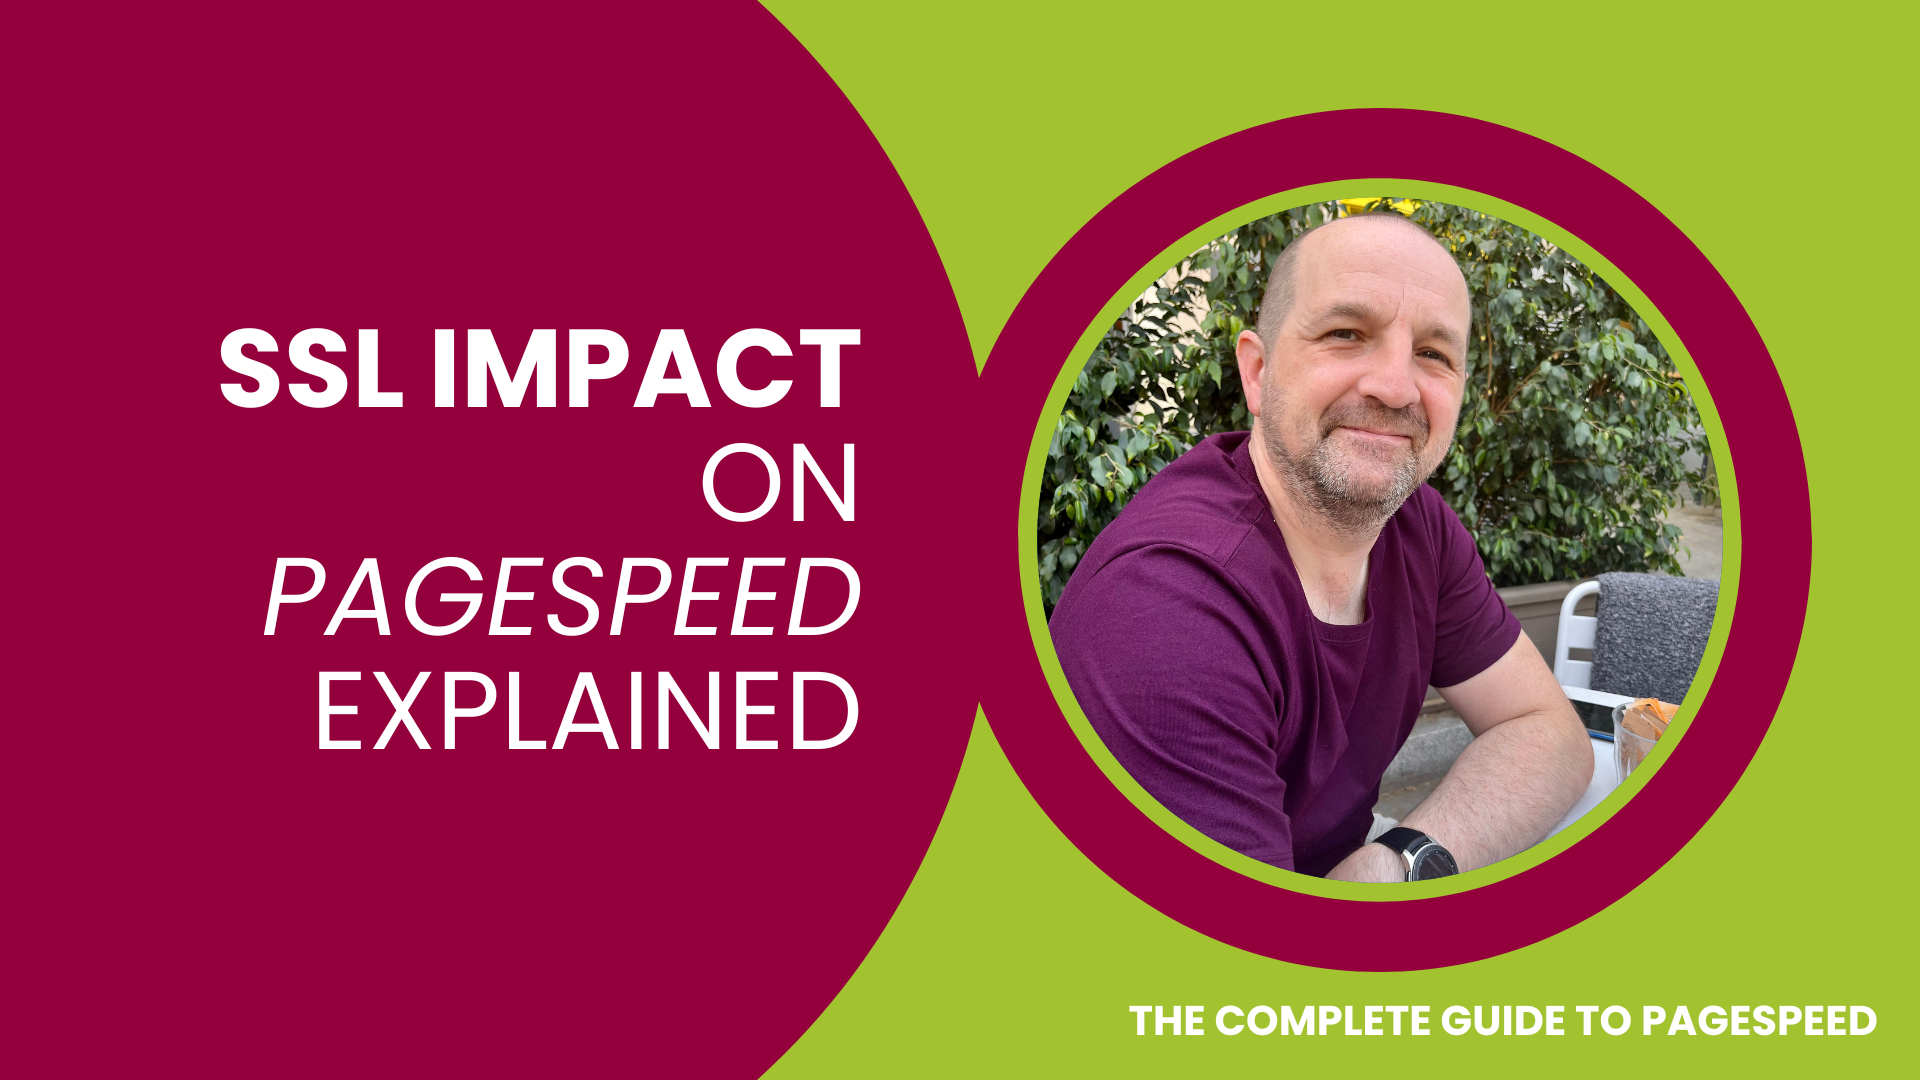 SSL Impact on Pagespeed Explained